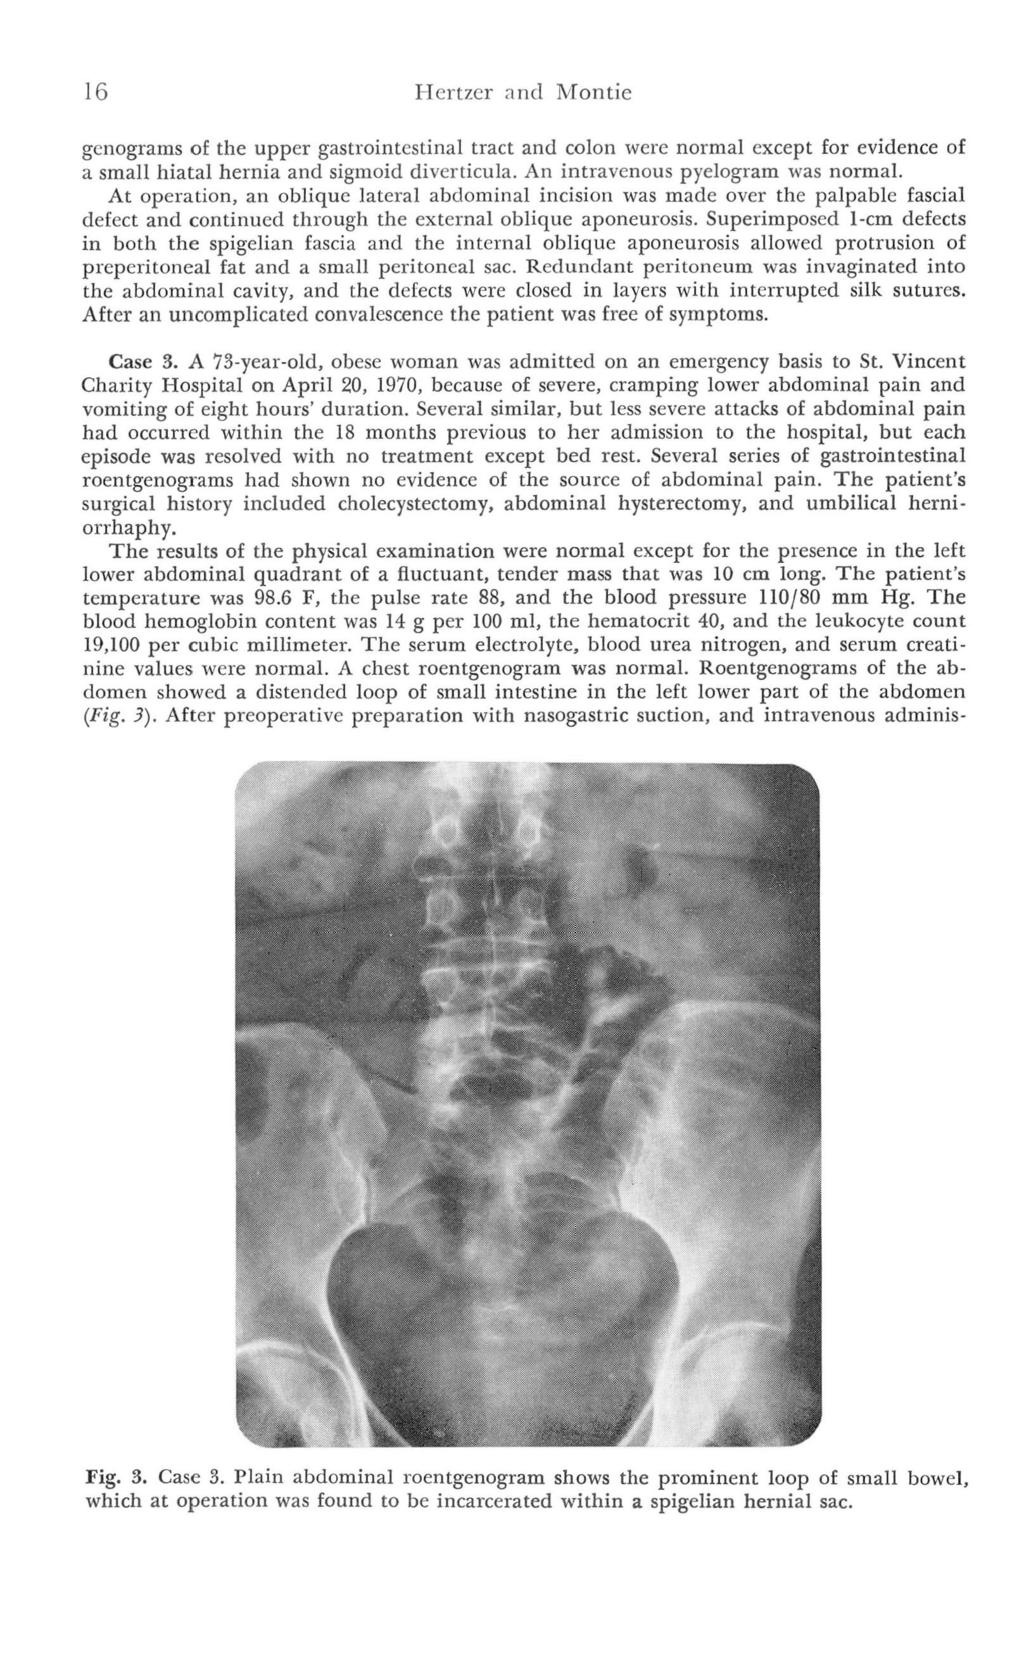 16 Hertzer and Montie gcnograms of the upper gastrointestinal tract and colon were normal except for evidence of a small hiatal hernia and sigmoid diverticula. An intravenous pyelogram was normal.